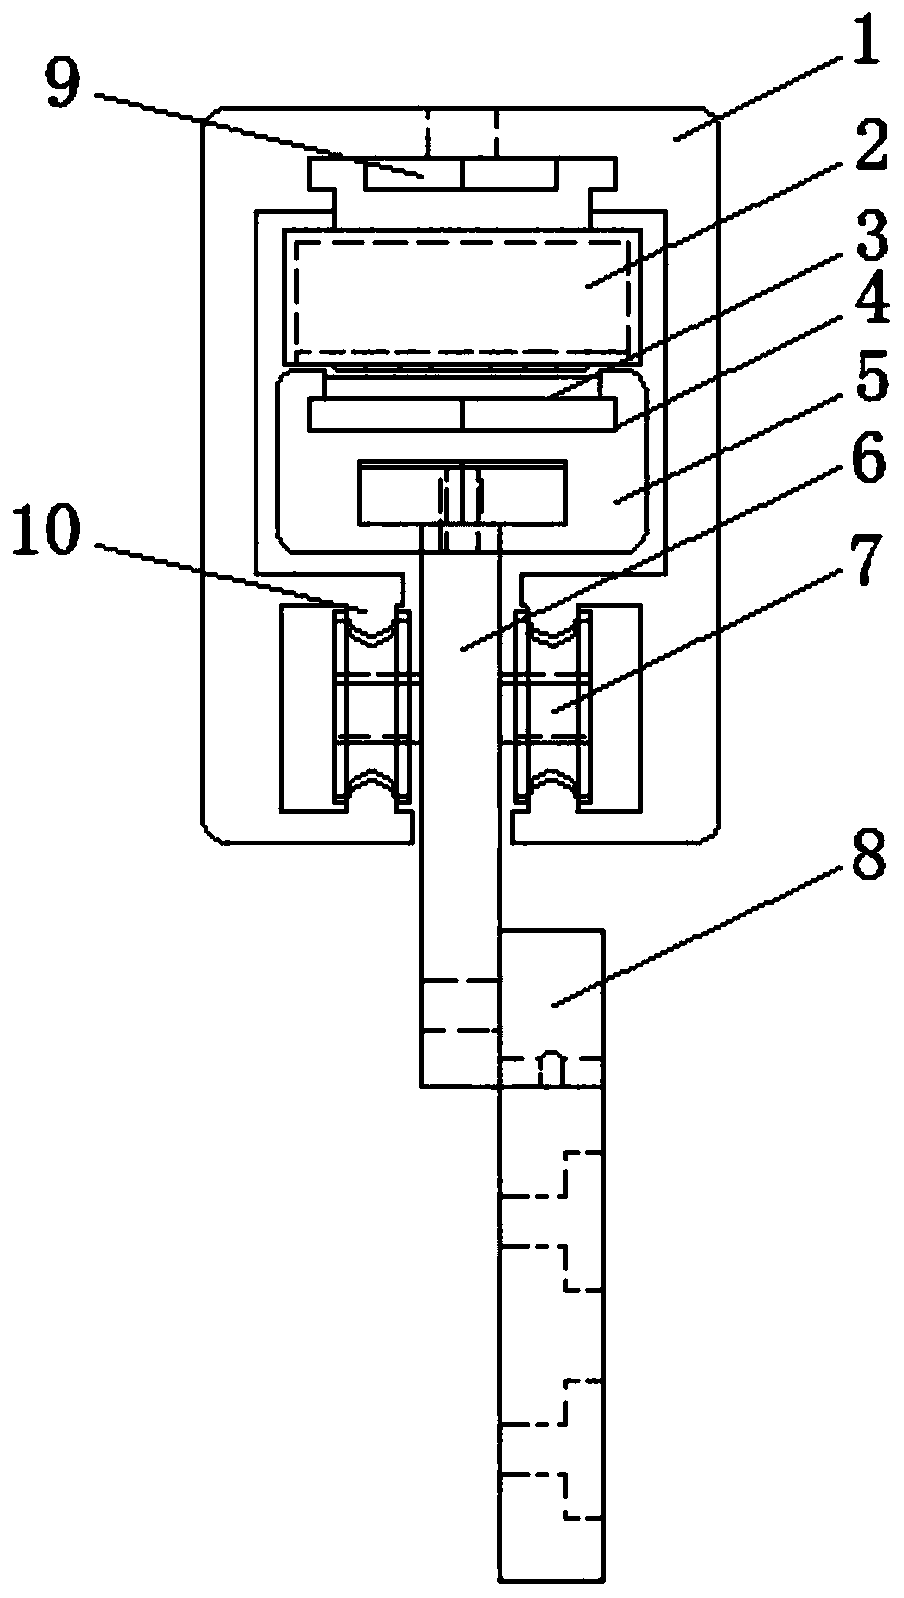 Double-leaf suspension door of permanent magnet synchronous linear motor